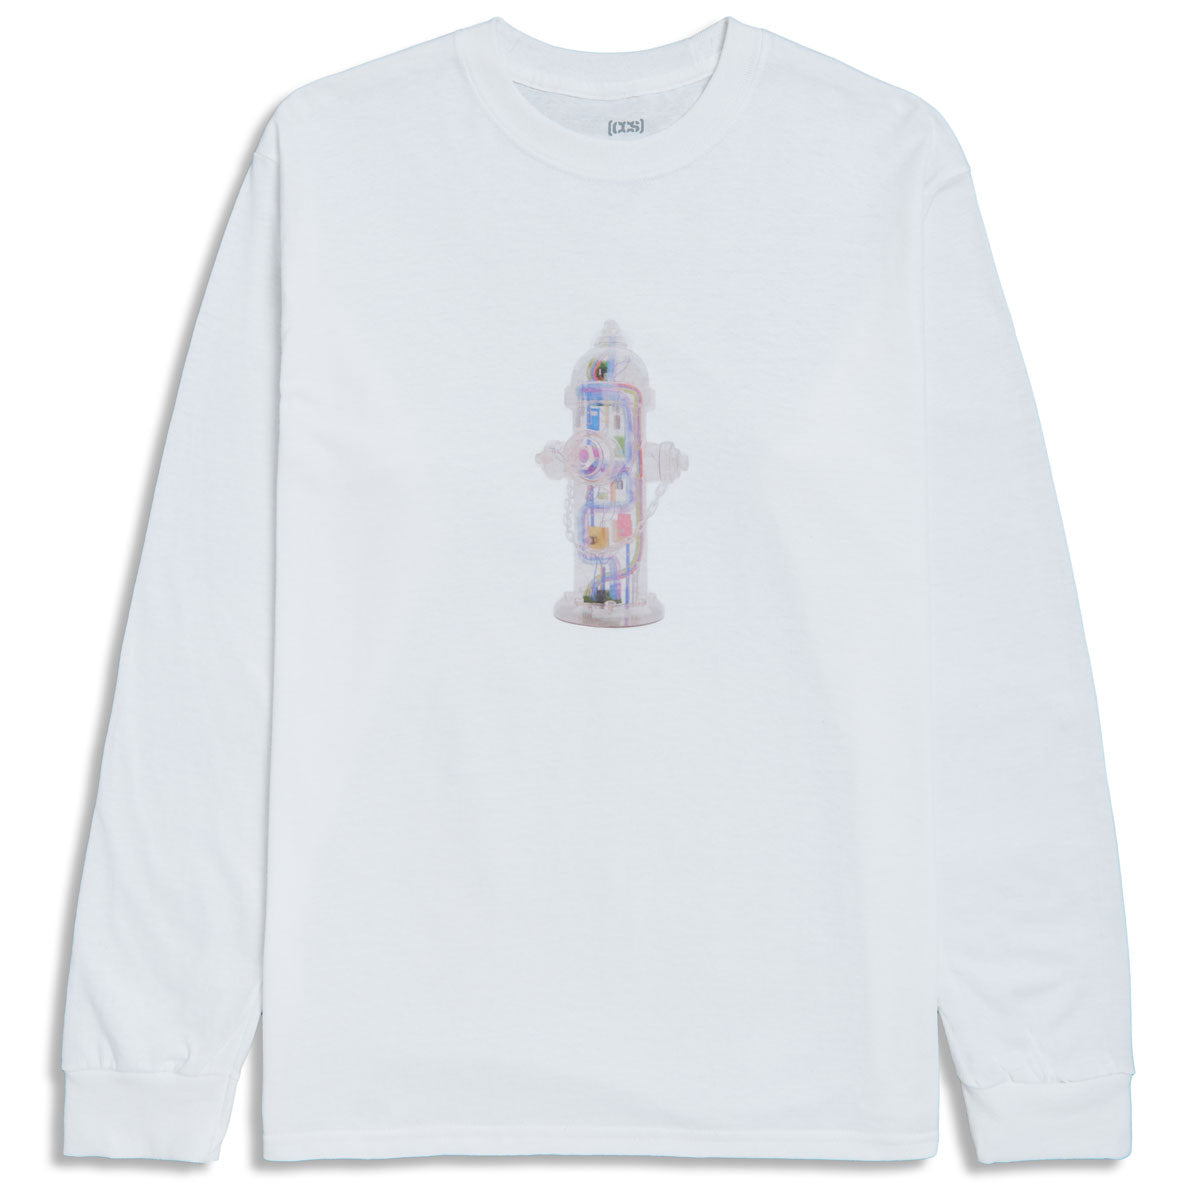 CCS Going Clear Hydrant Long Sleeve T-Shirt - White image 1